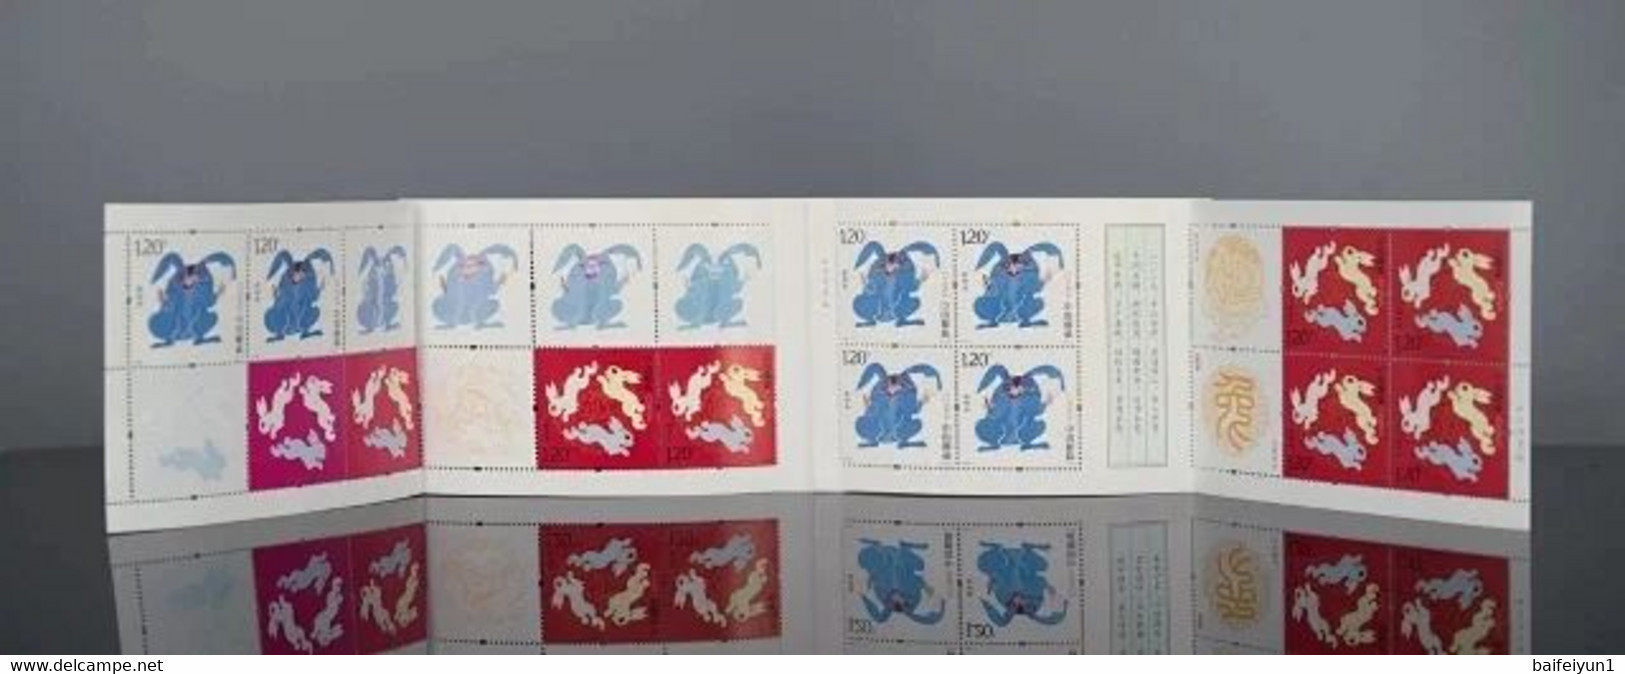 CHINA 2023-1 China New Year Zodiac Of Rabbit Stamp Booklet(Hologram Cover) - Ologrammi